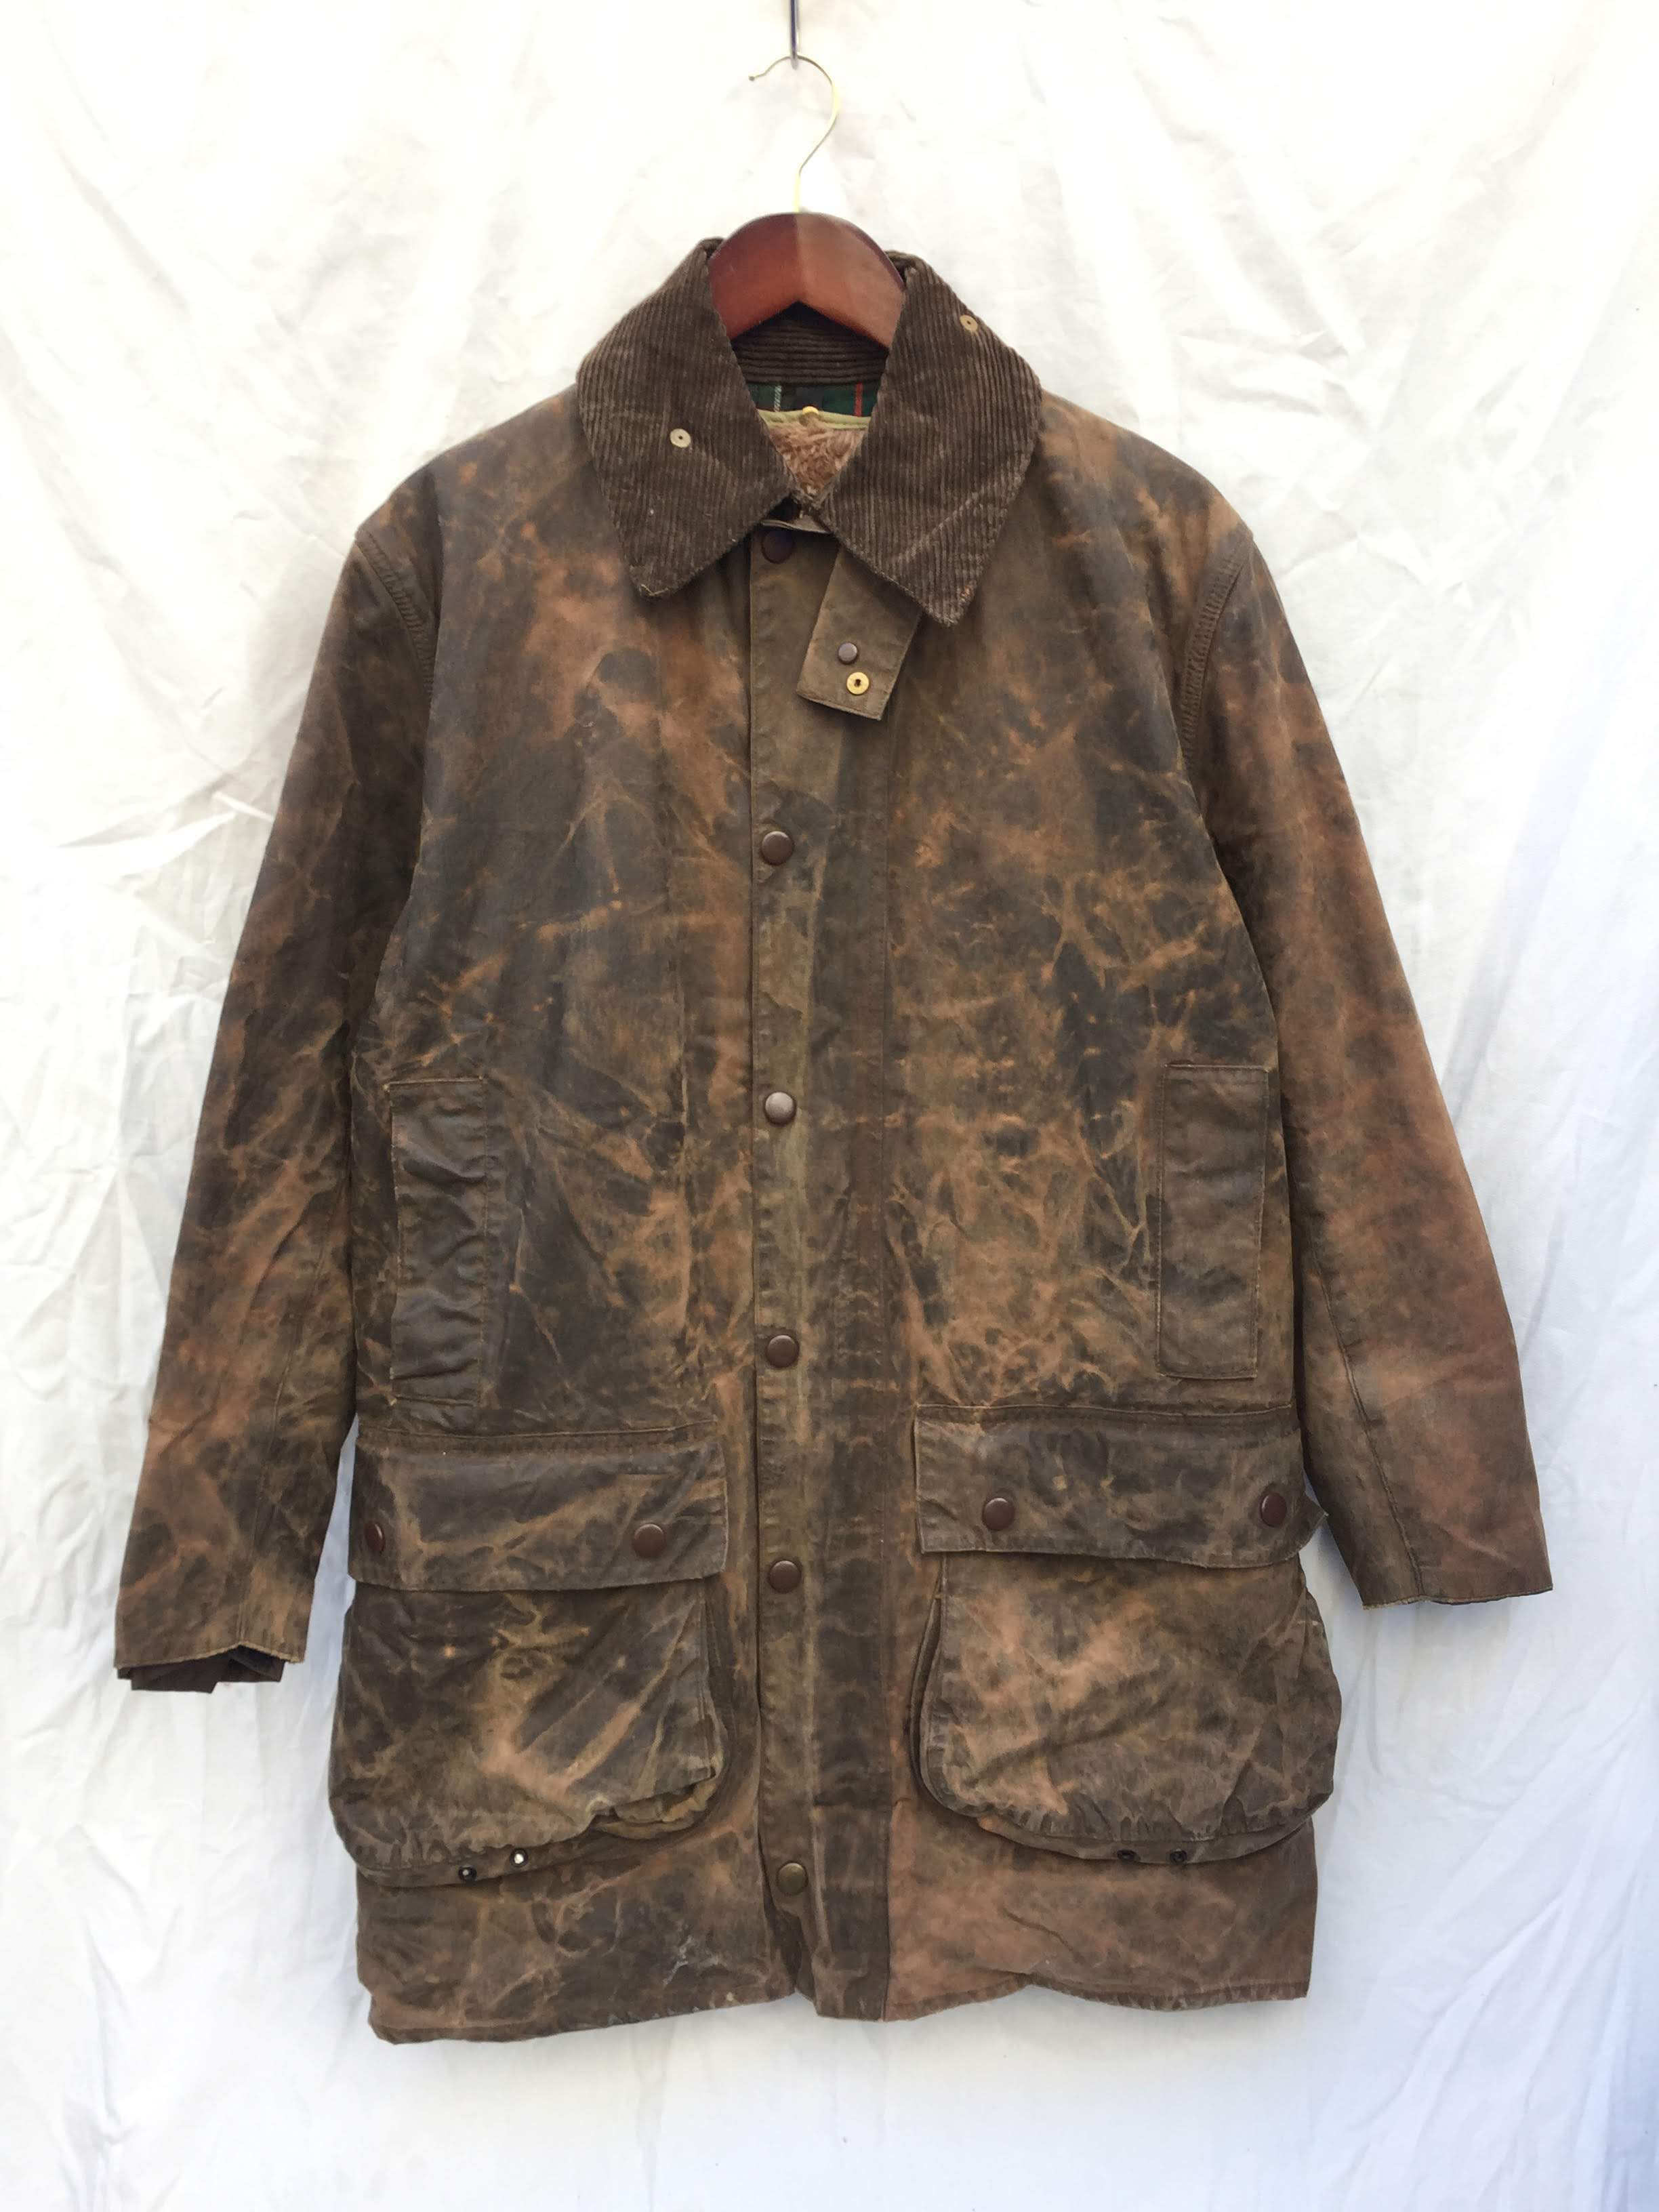 1 Crest Vintage Barbour NORTHUMBRIA Made in England